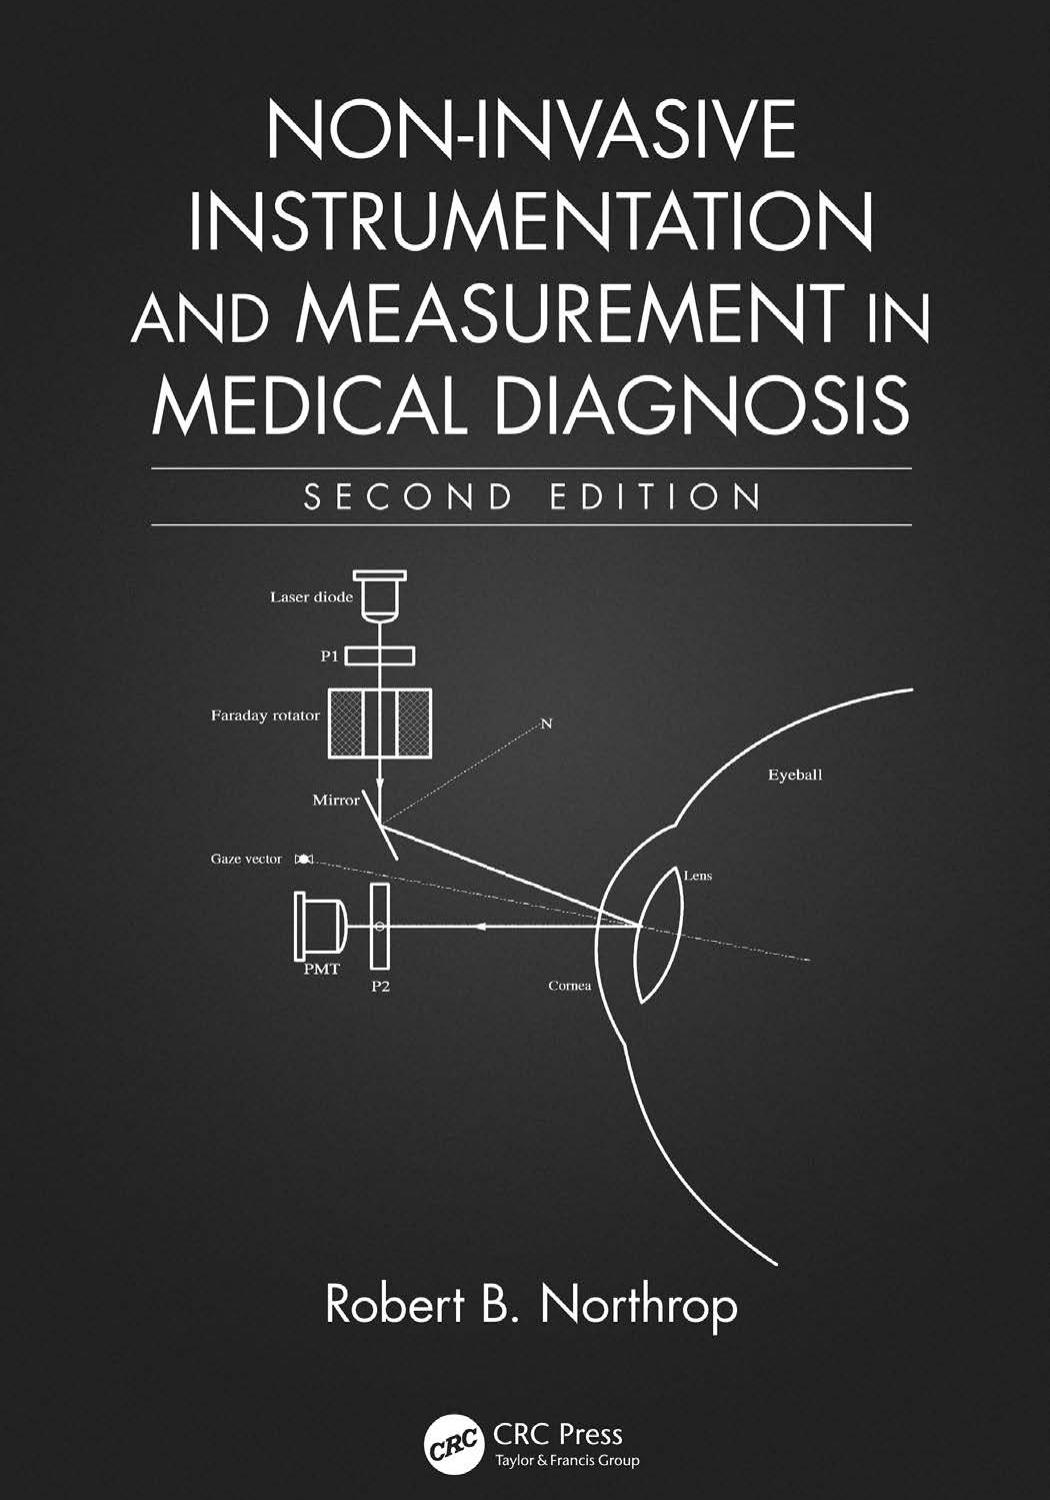 Noninvasive Instrumentation and Measurement in Medical Diagnosis, Second Edition